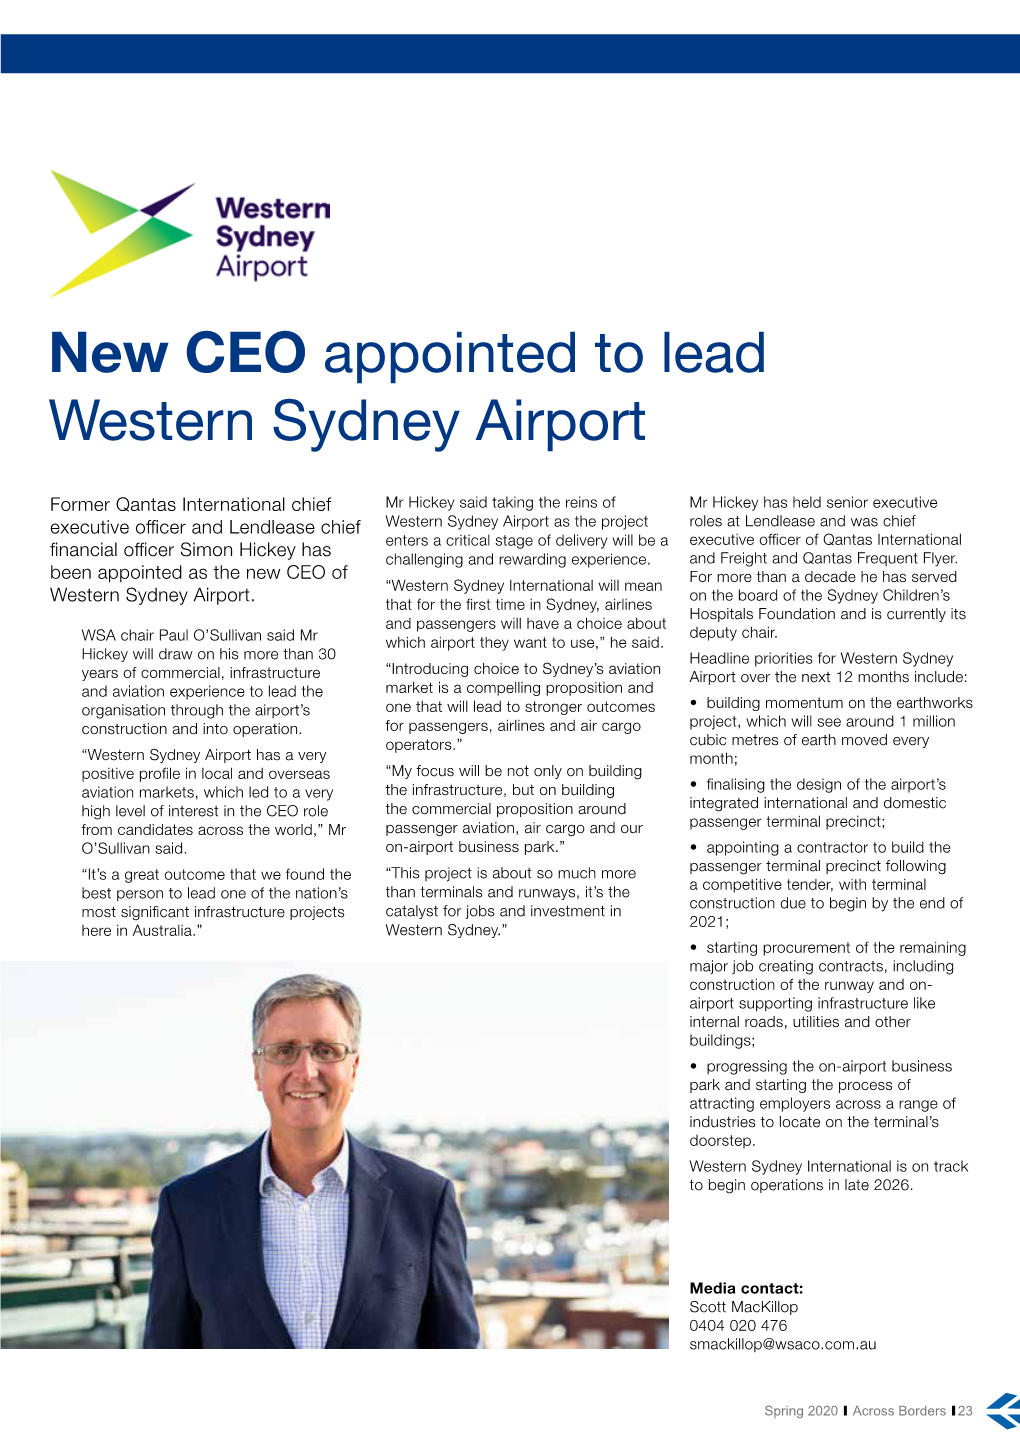 New CEO Appointed to Lead Western Sydney Airport